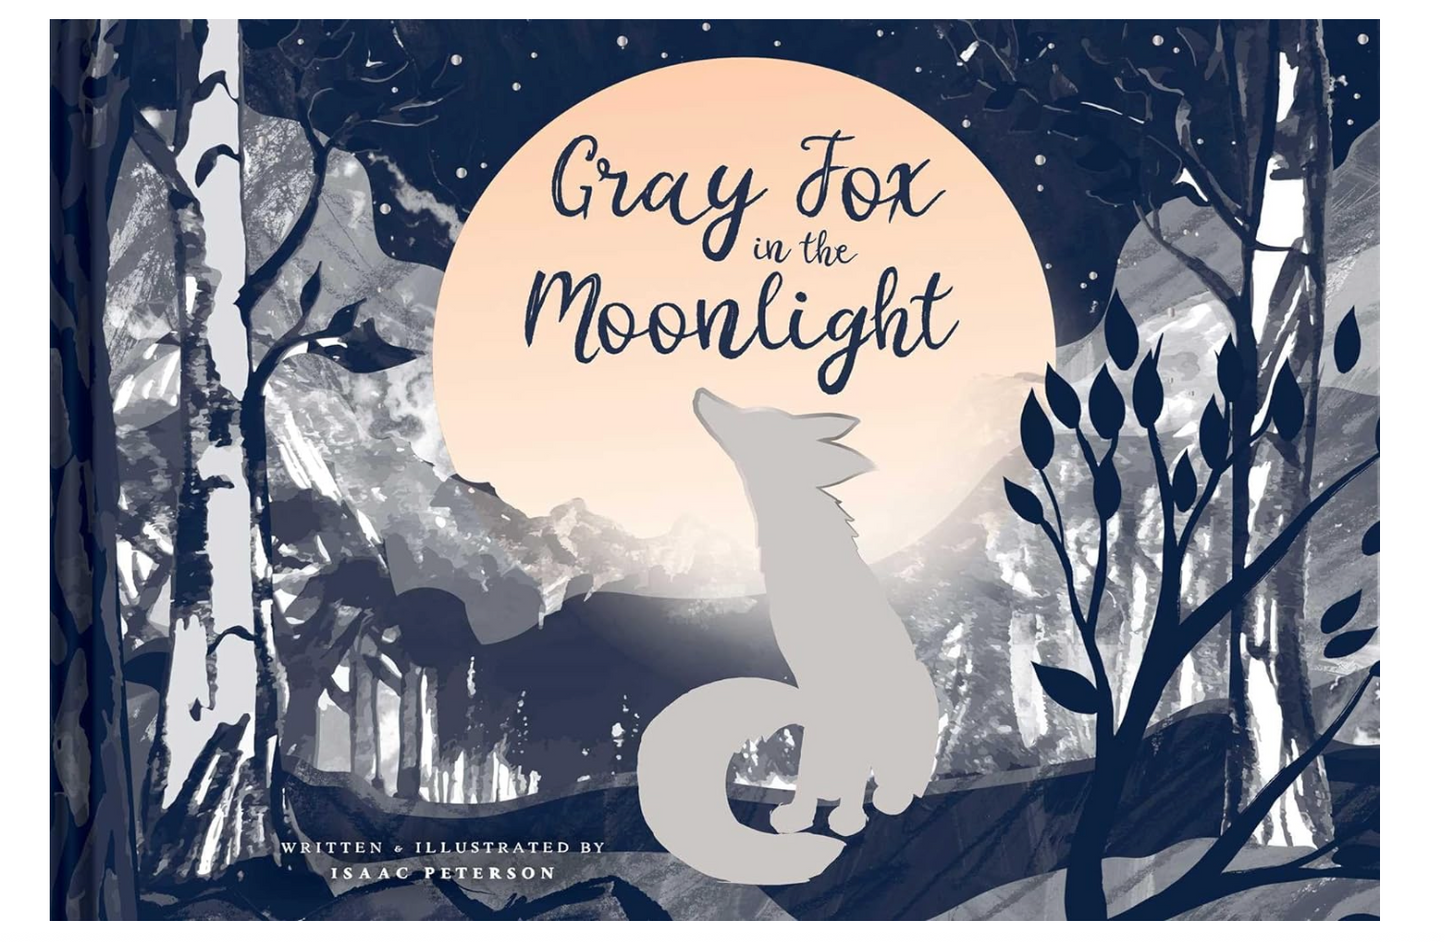 Oddly Enough Books- Gray Fox in the Moonlight by Issac Peterson